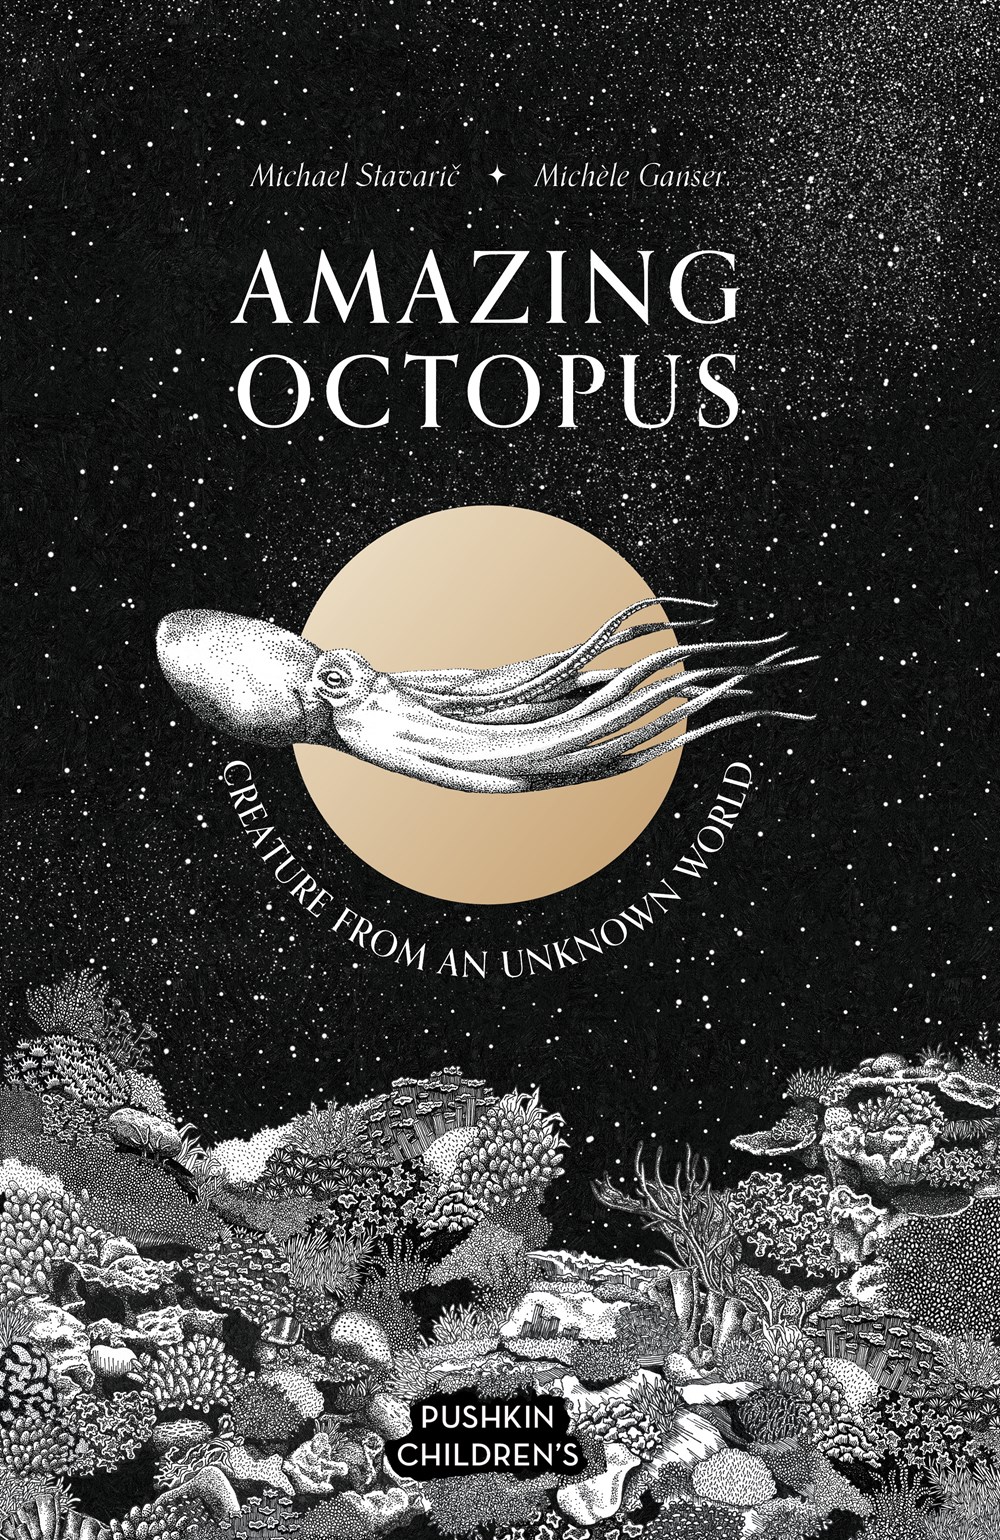 ARC REVIEW: AMAZING OCTOPUS: CREATURE FROM AN UNKNOWN WORLD BY MICHAEL STAVARIC, MICHÈL GANSER (ILLUSTRATOR) AND OLIVER LATSCH (TRANSLATOR)